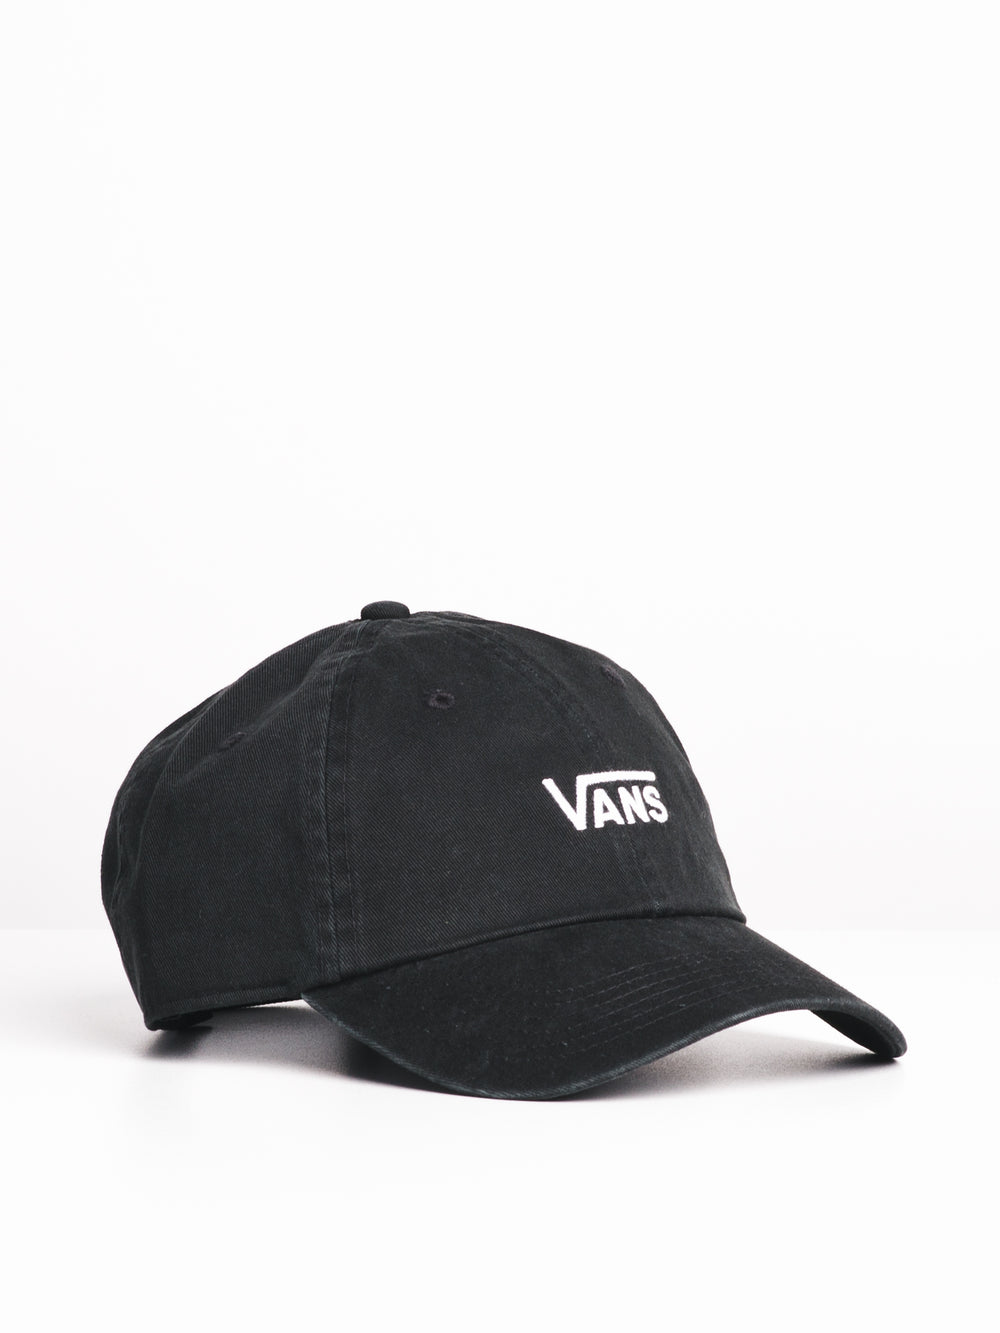 COURT SIDE HAT - BLACK/WHITE - CLEARANCE